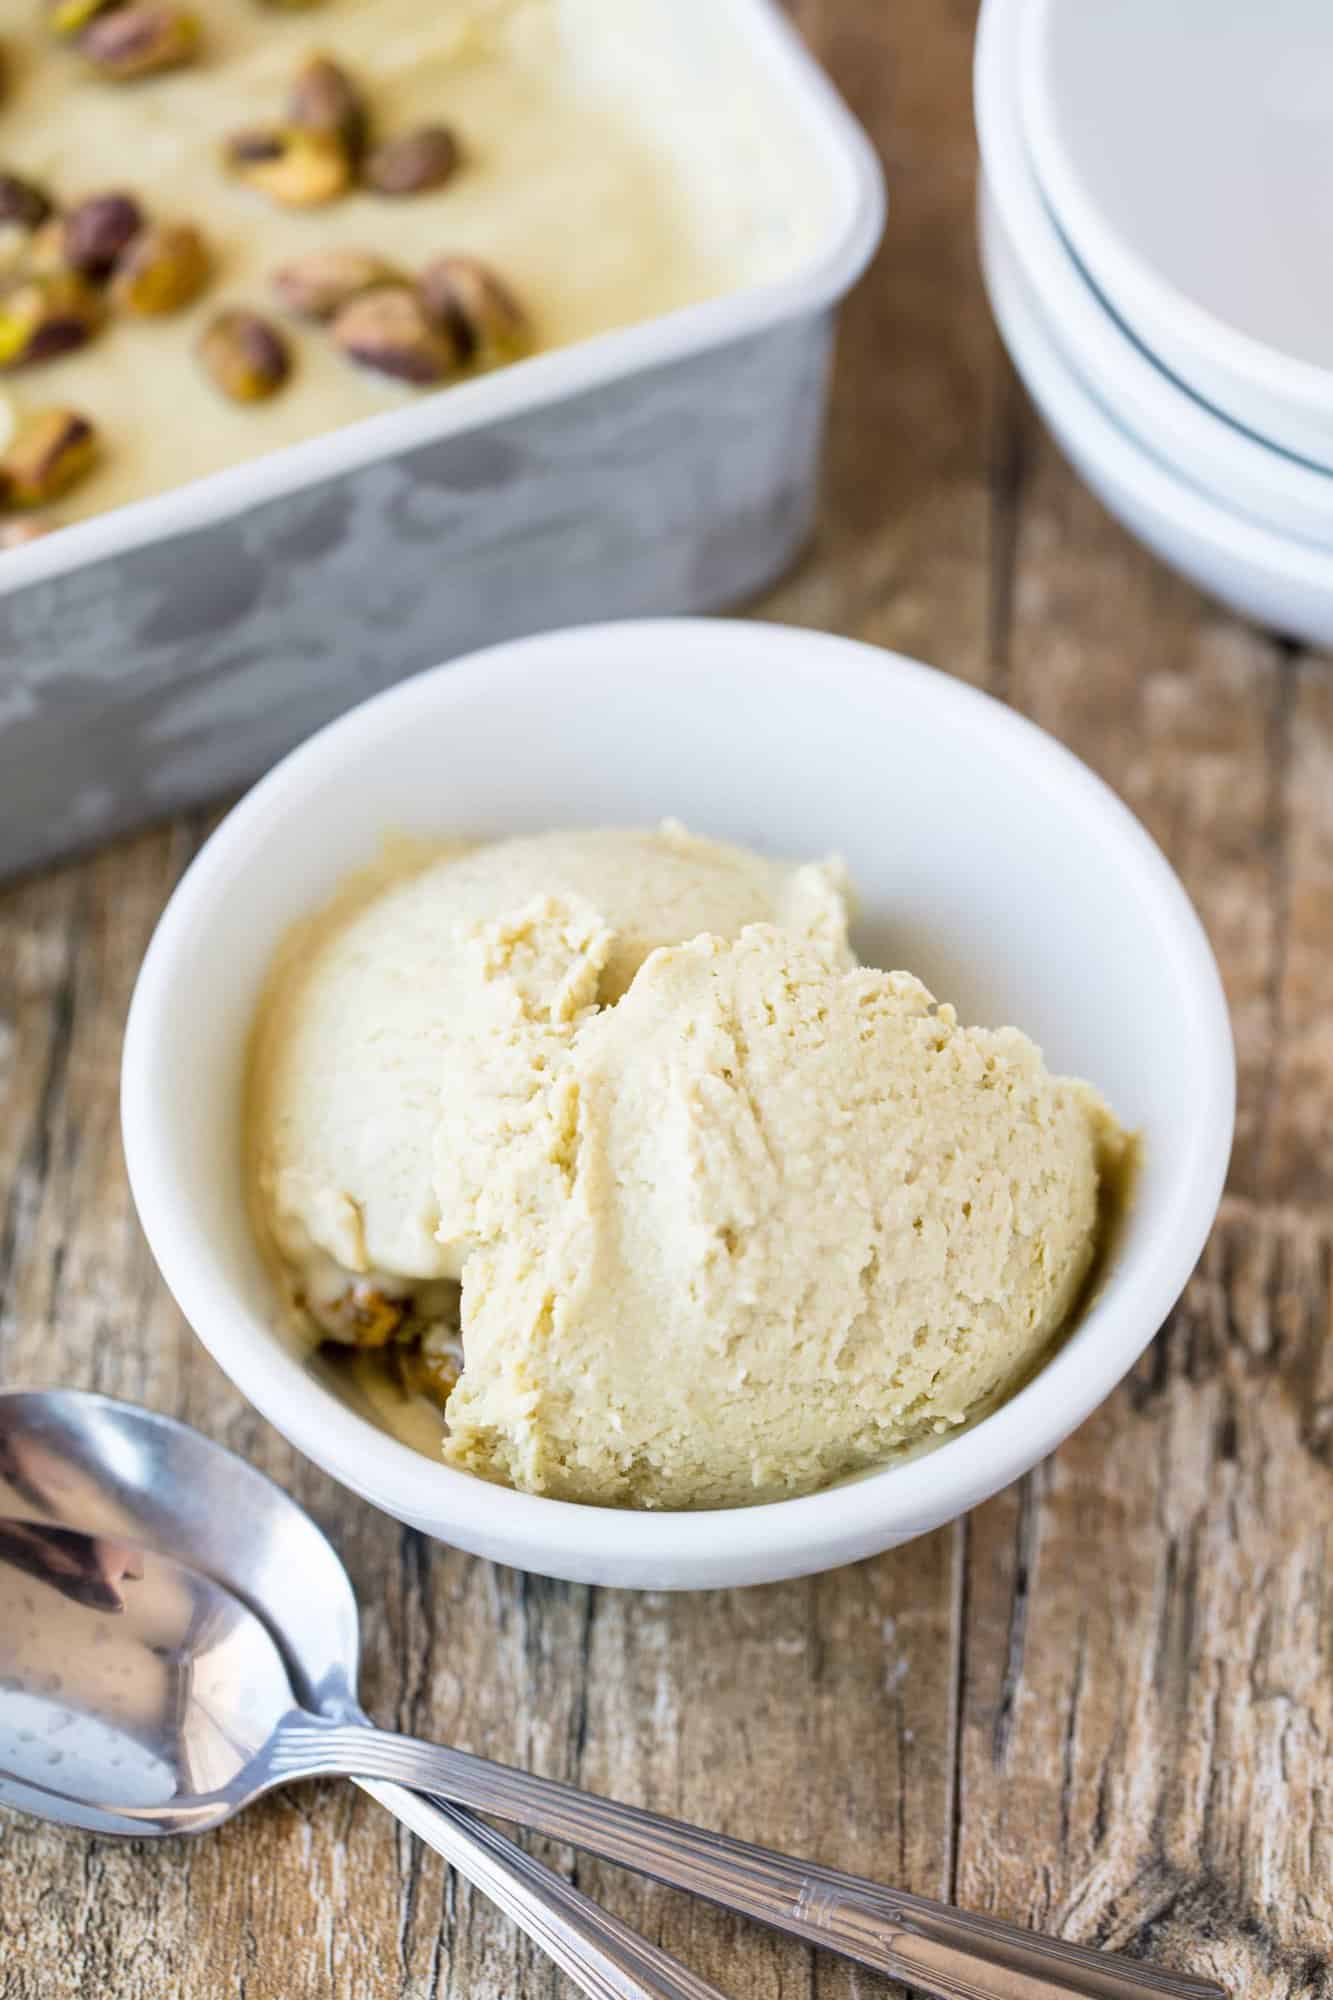 Learn How to Make Homemade Gelato By Hand without the use of an ice cream maker. Make it the old fashioned way! This Pistachio Gelato is a total winner.